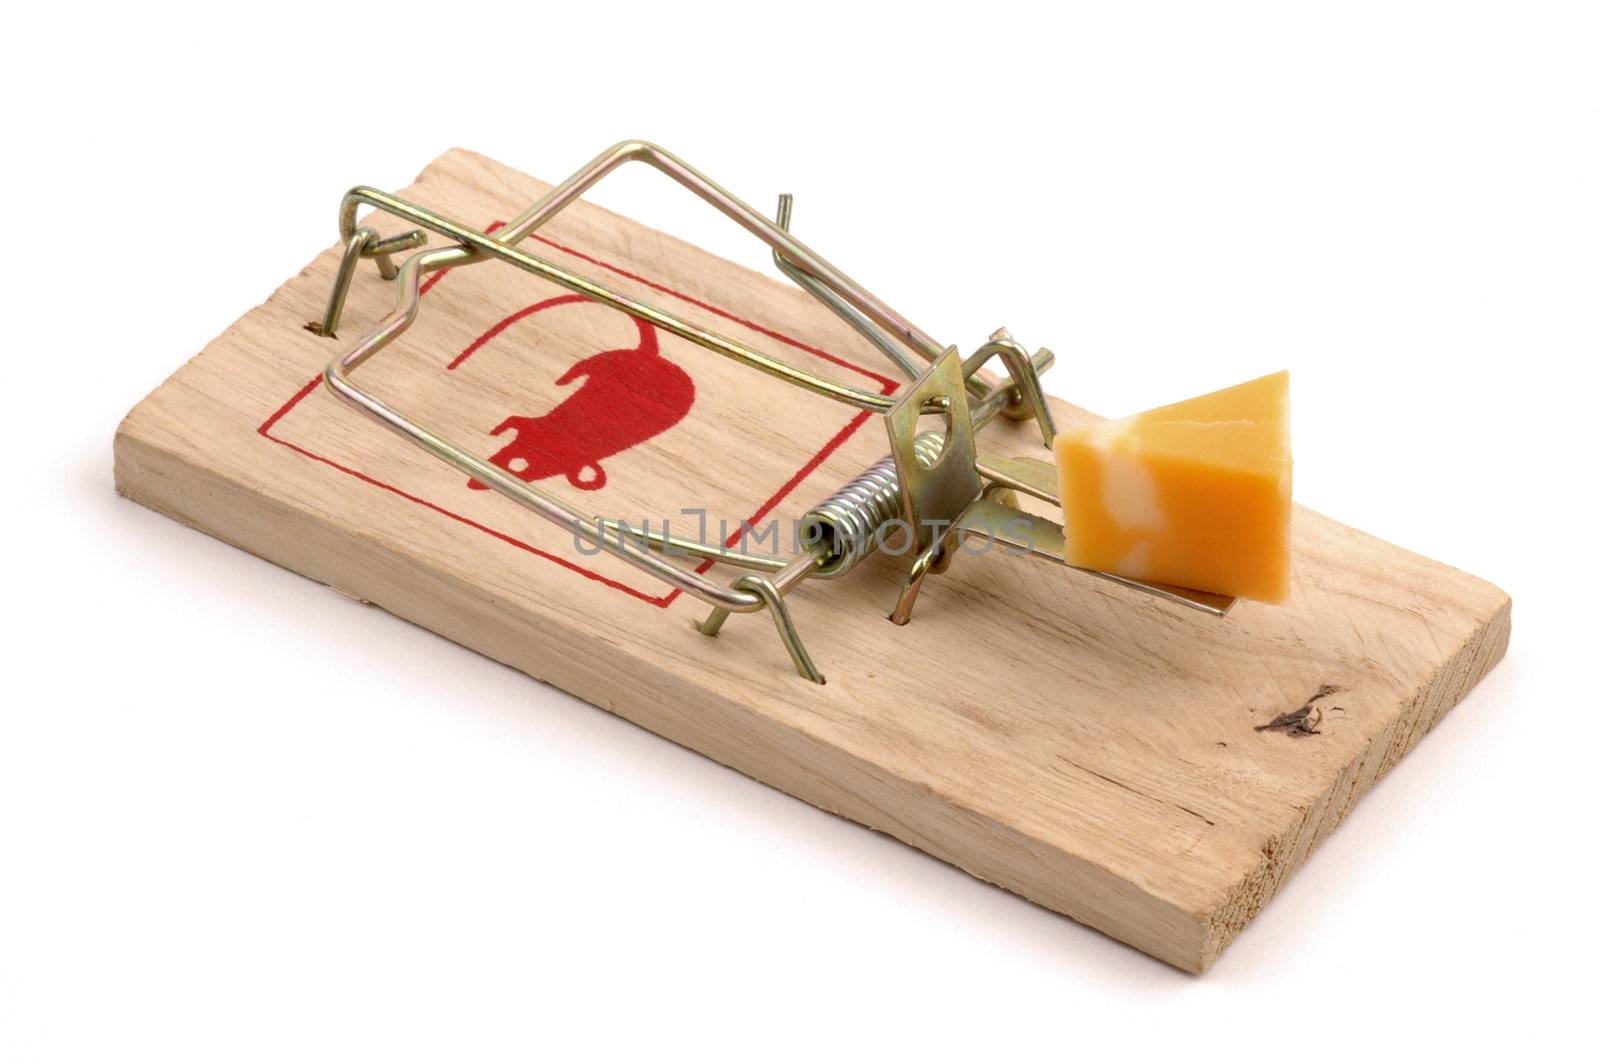 Baited Mousetrap by billberryphotography